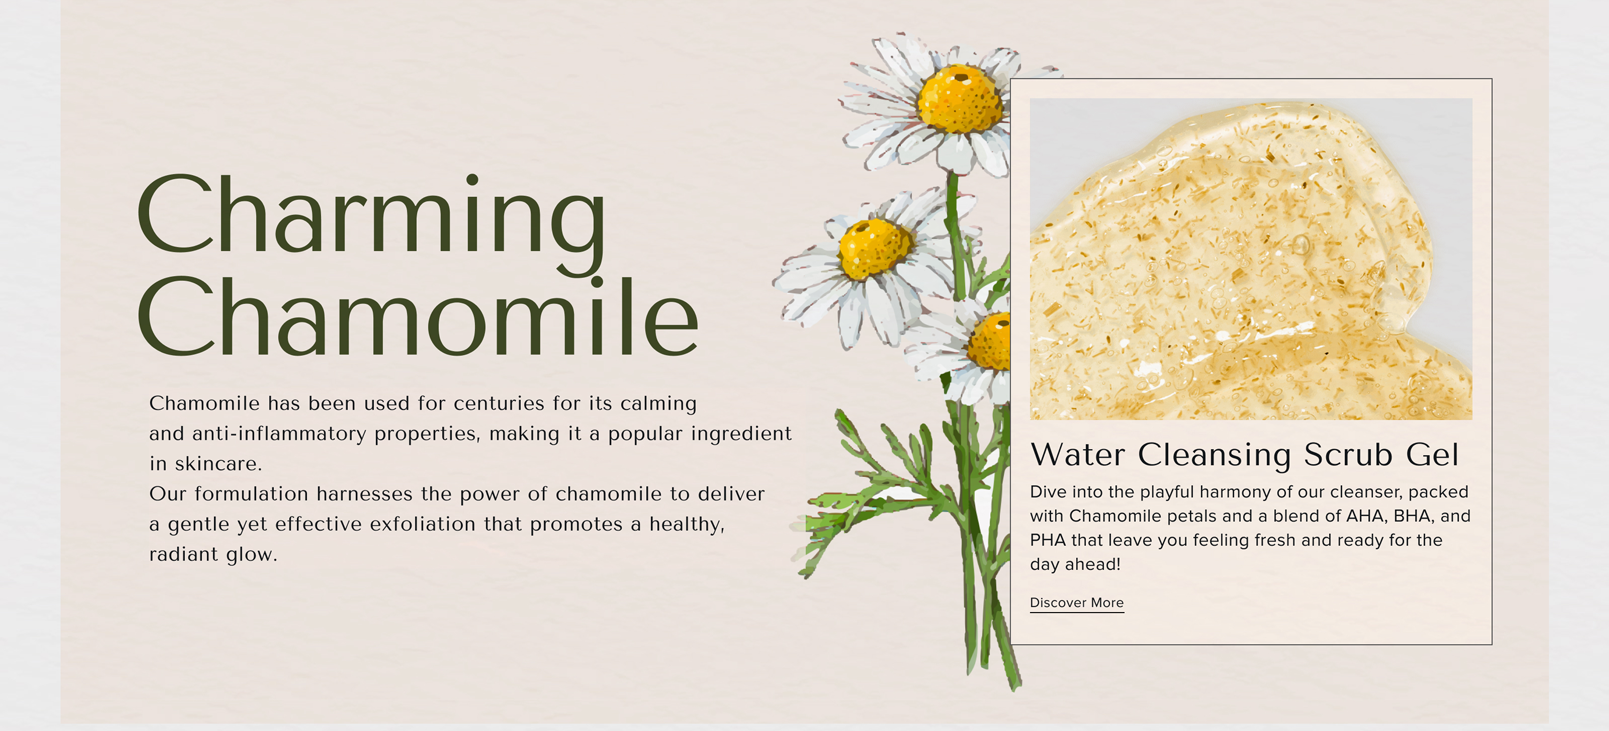 Charming Chamomile Chamomile has been used for centuries for its calming and anti-inflammatory properties, making it a popular ingredient in skincare. Our formulation harnesses the power of chamomile to deliver a gentle yet effective exfoliation that promotes a healthy, radiant glow. - Water Cleansing Scrub Gel 